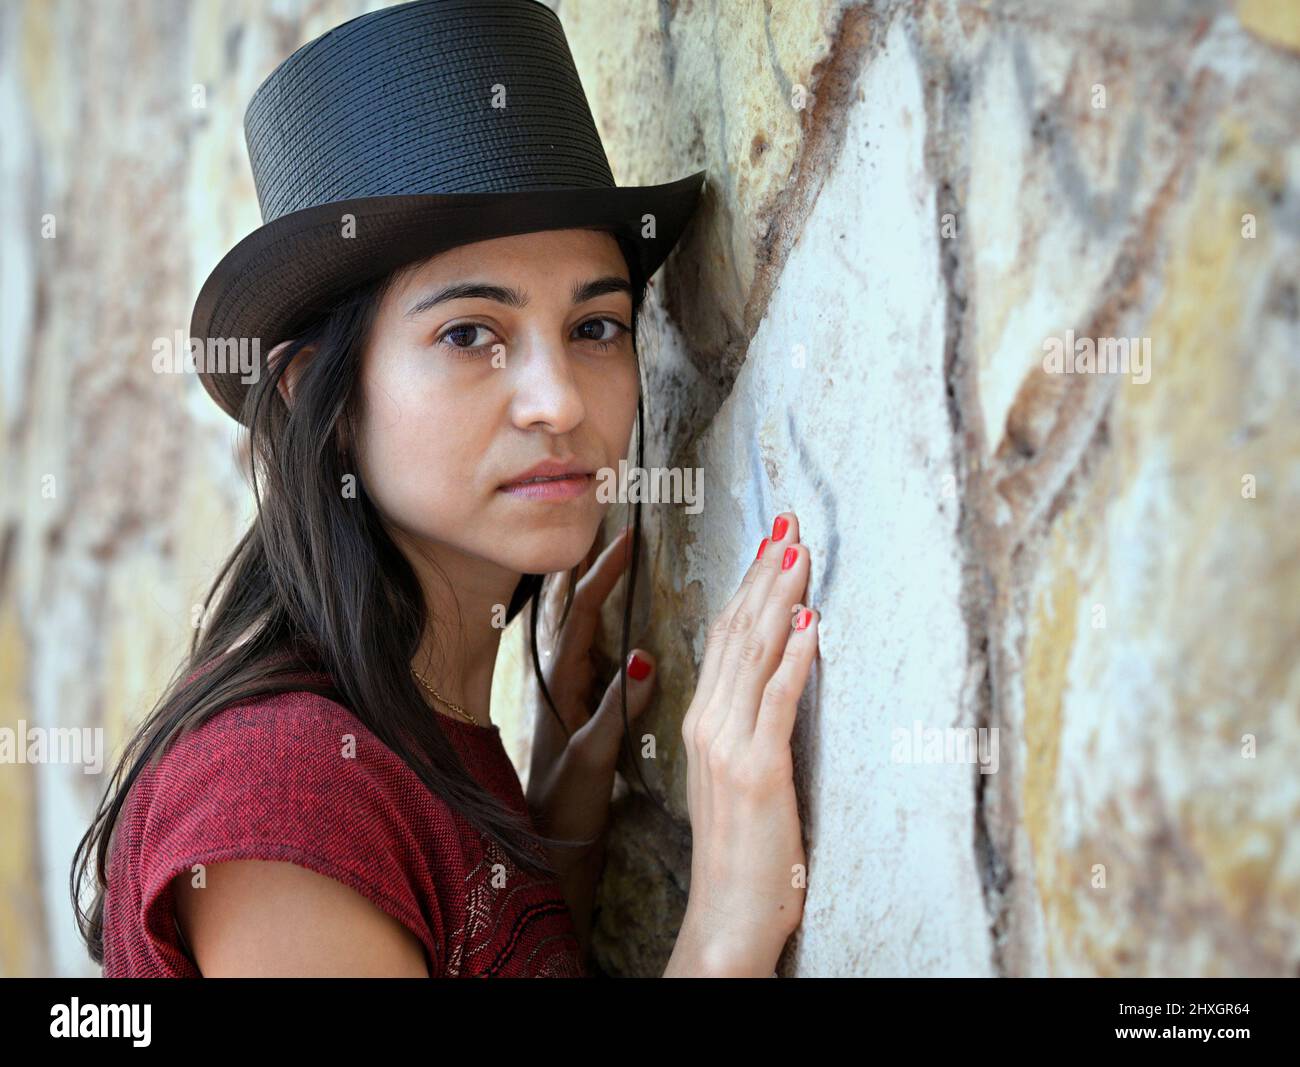 Young beautiful brunette woman with long hair and red fingernails wears a black top hat and looks at the viewer in front of a stone wall background. Stock Photo